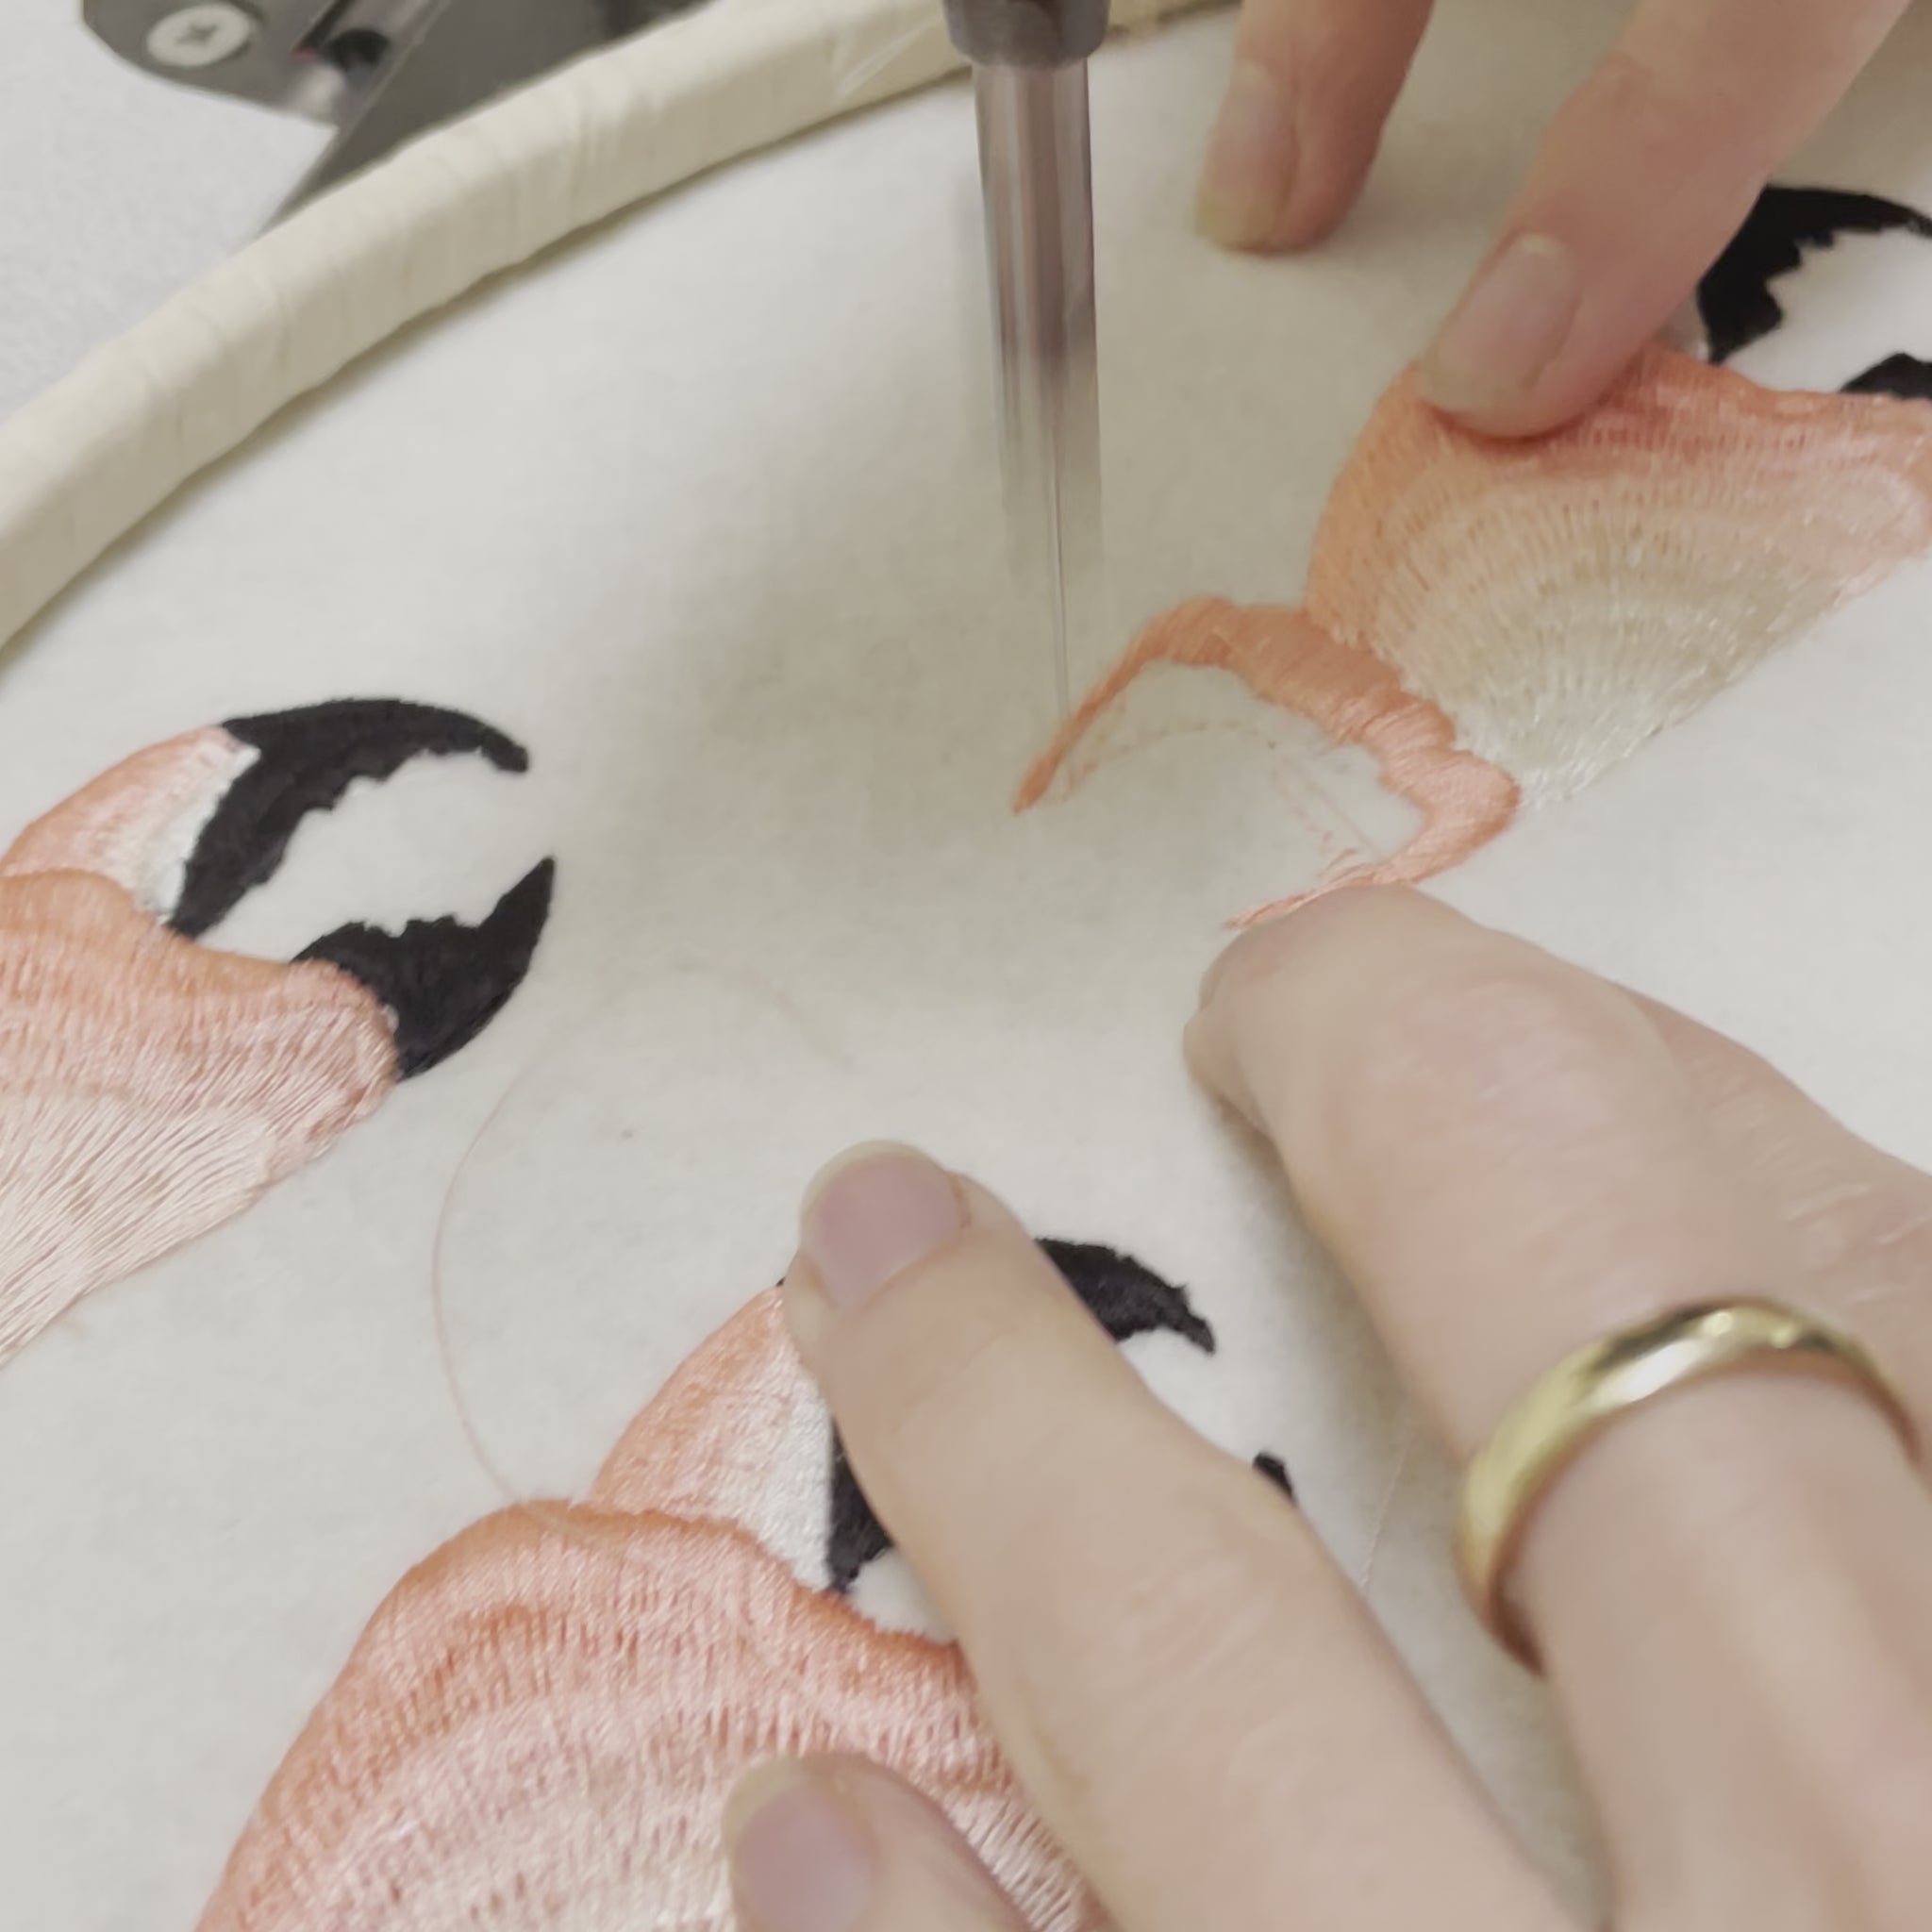 A close-up video of some hands and the needle of a sewing machine showing the embroidering of the crab claw